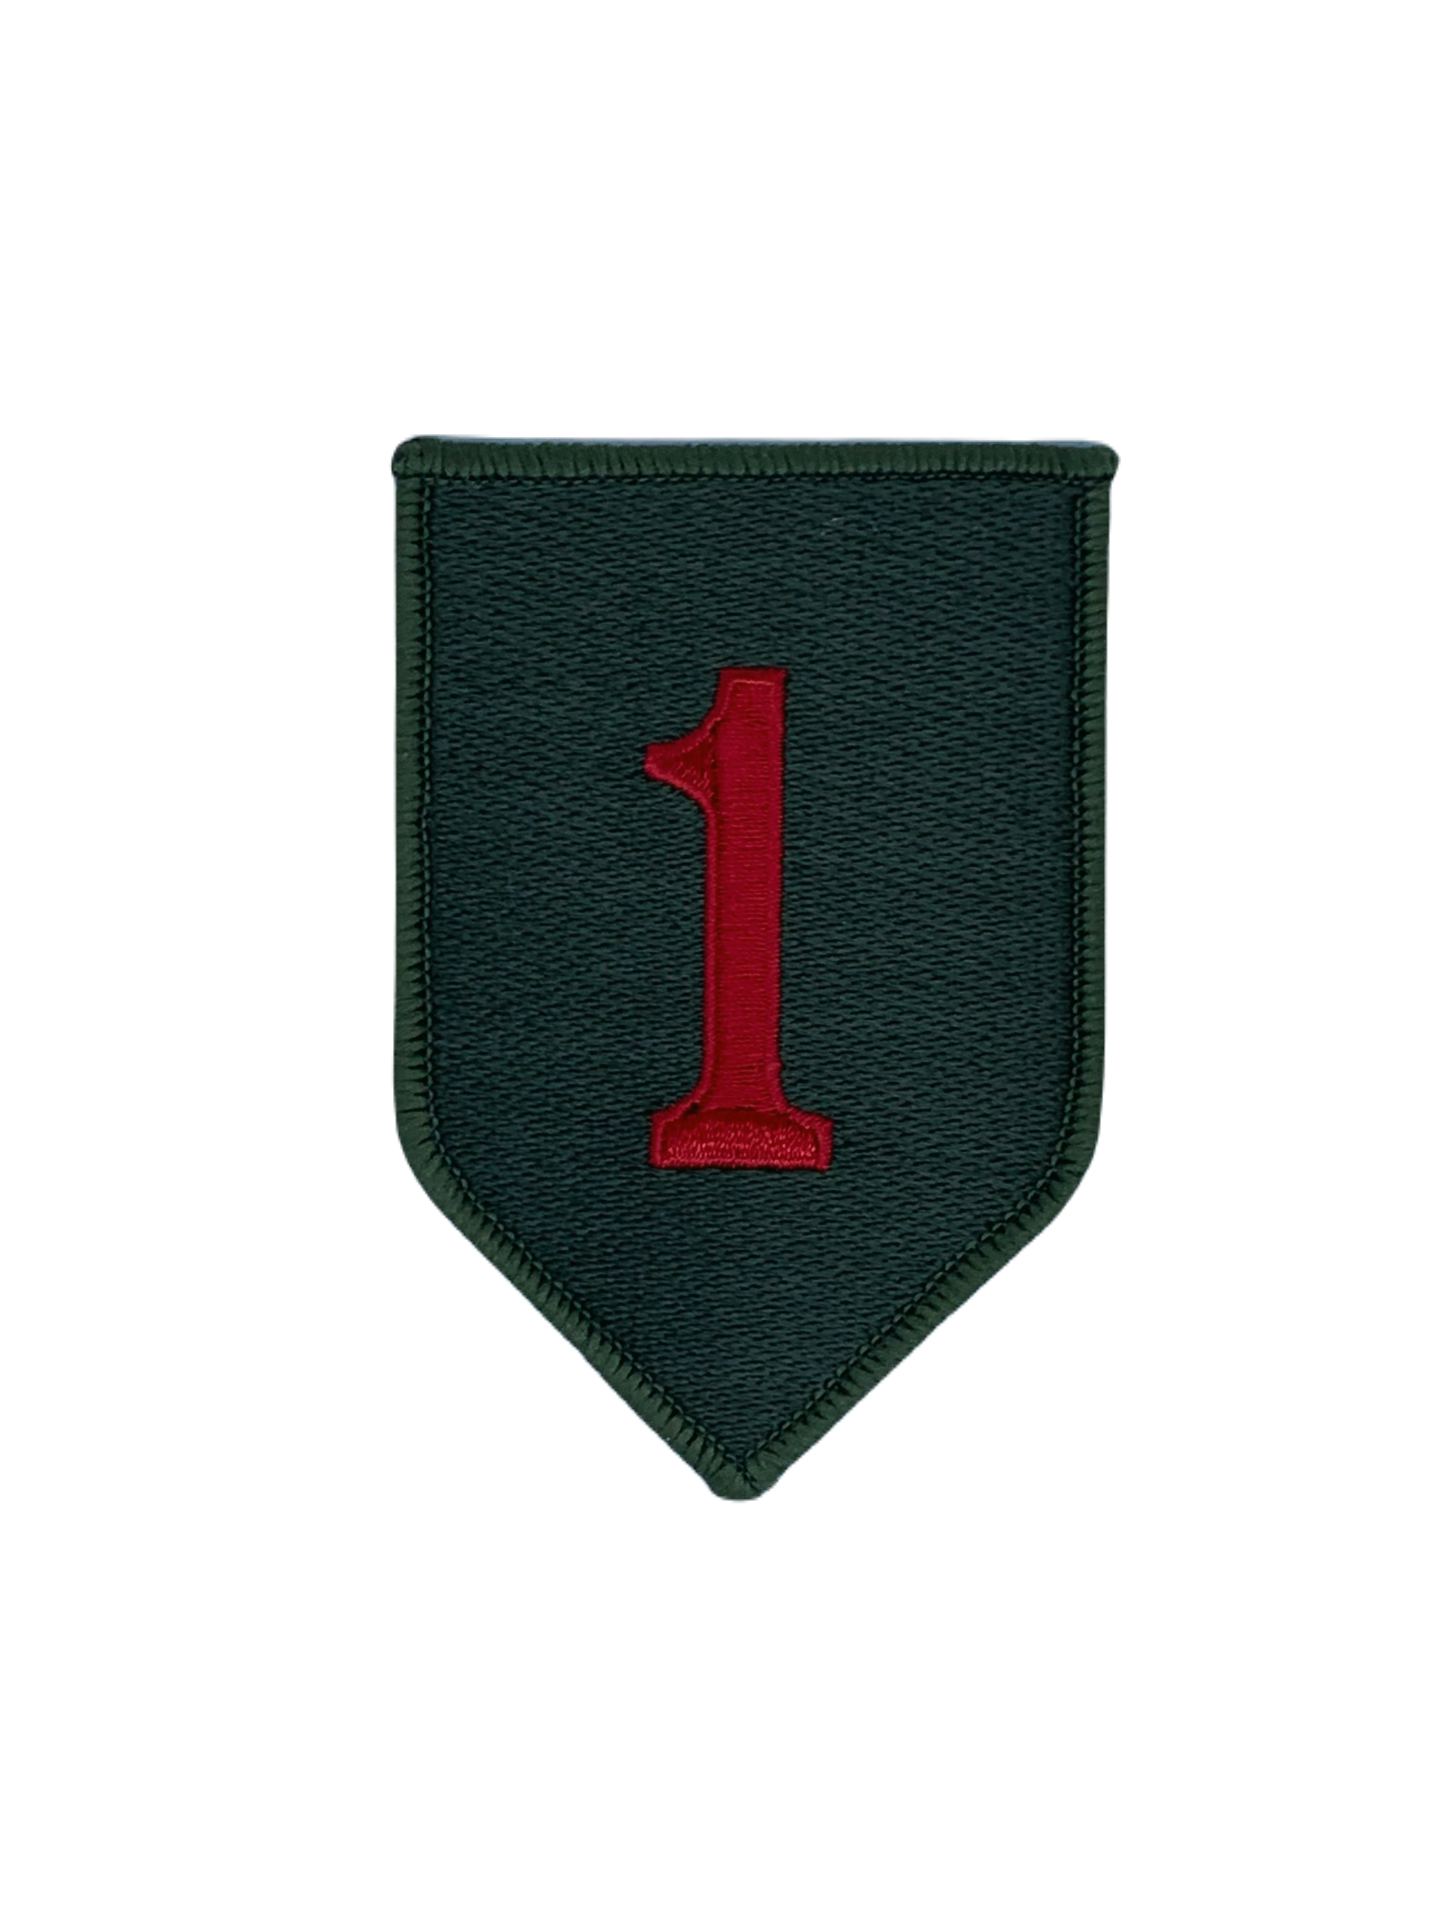 The Big Red 1 Patch (3.5 Inch) Iron or Sew-on Badge WW2 1st Infantry Division Badge Army Military Patches